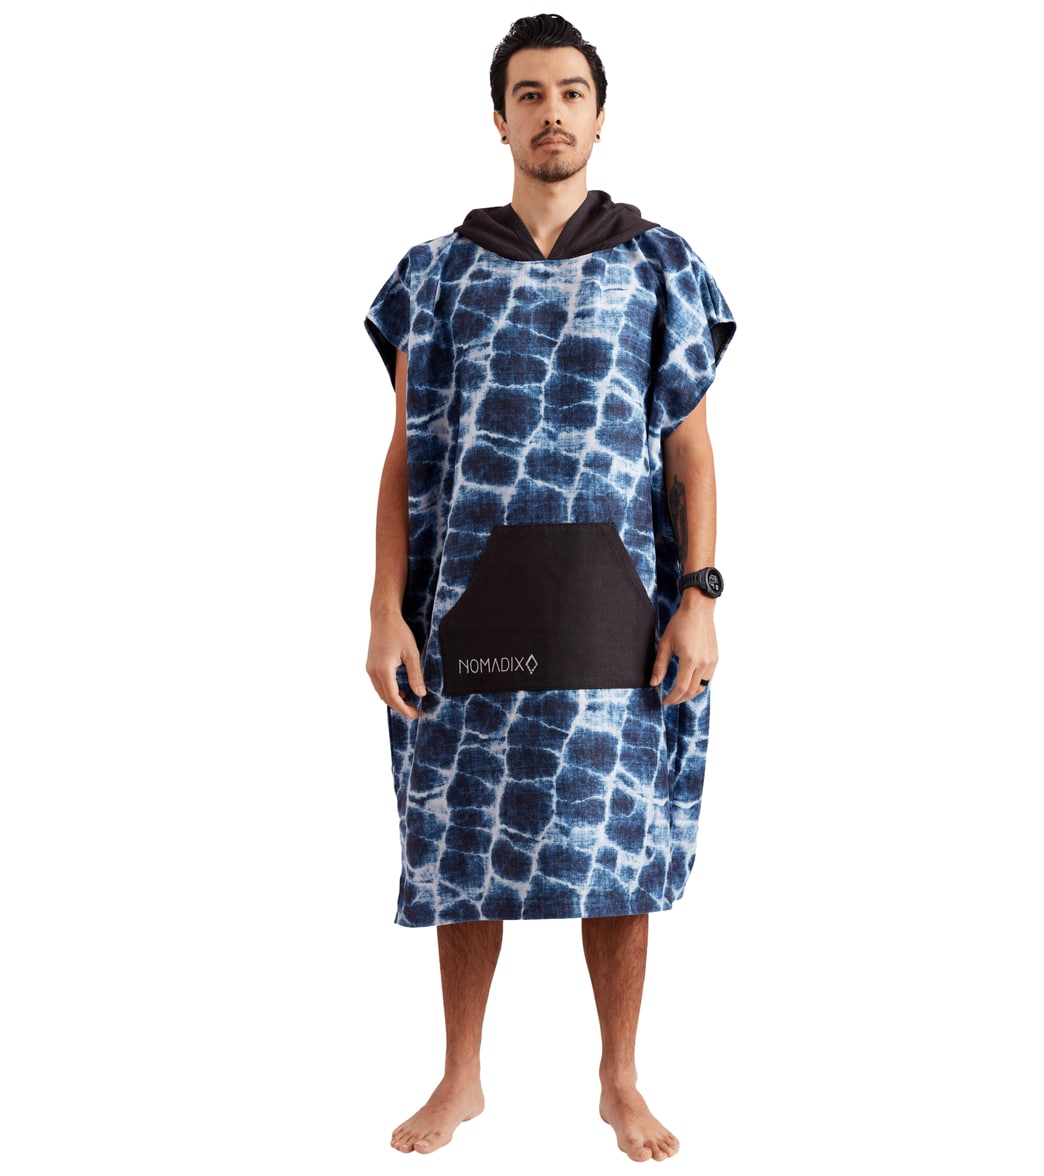 Nomadix Agua Blue Changing Poncho - Multi One Size - Swimoutlet.com